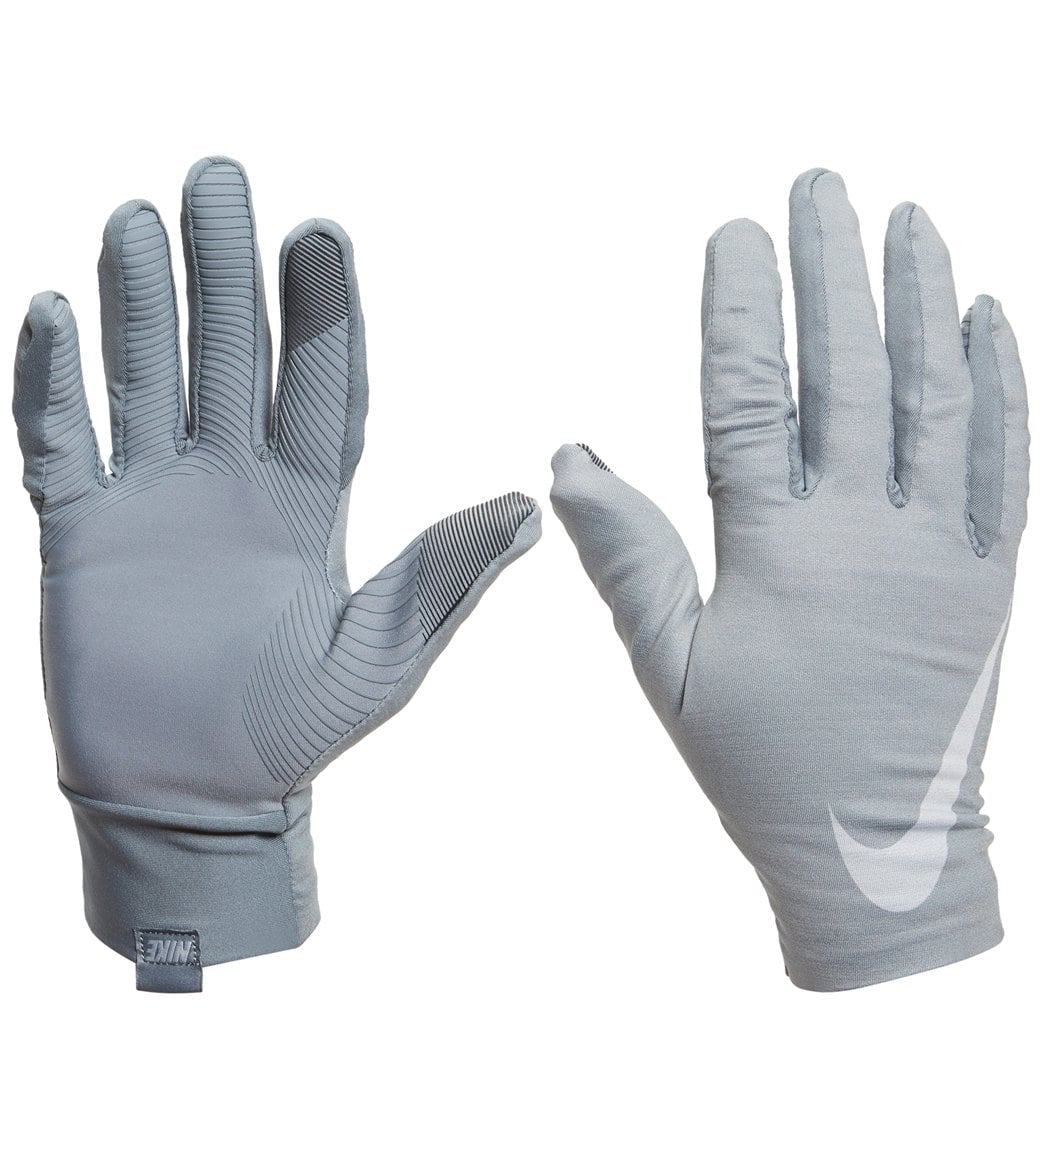 Nike Men's Base Layer Gloves - Cool Grey/Wolf Grey Small - Swimoutlet.com